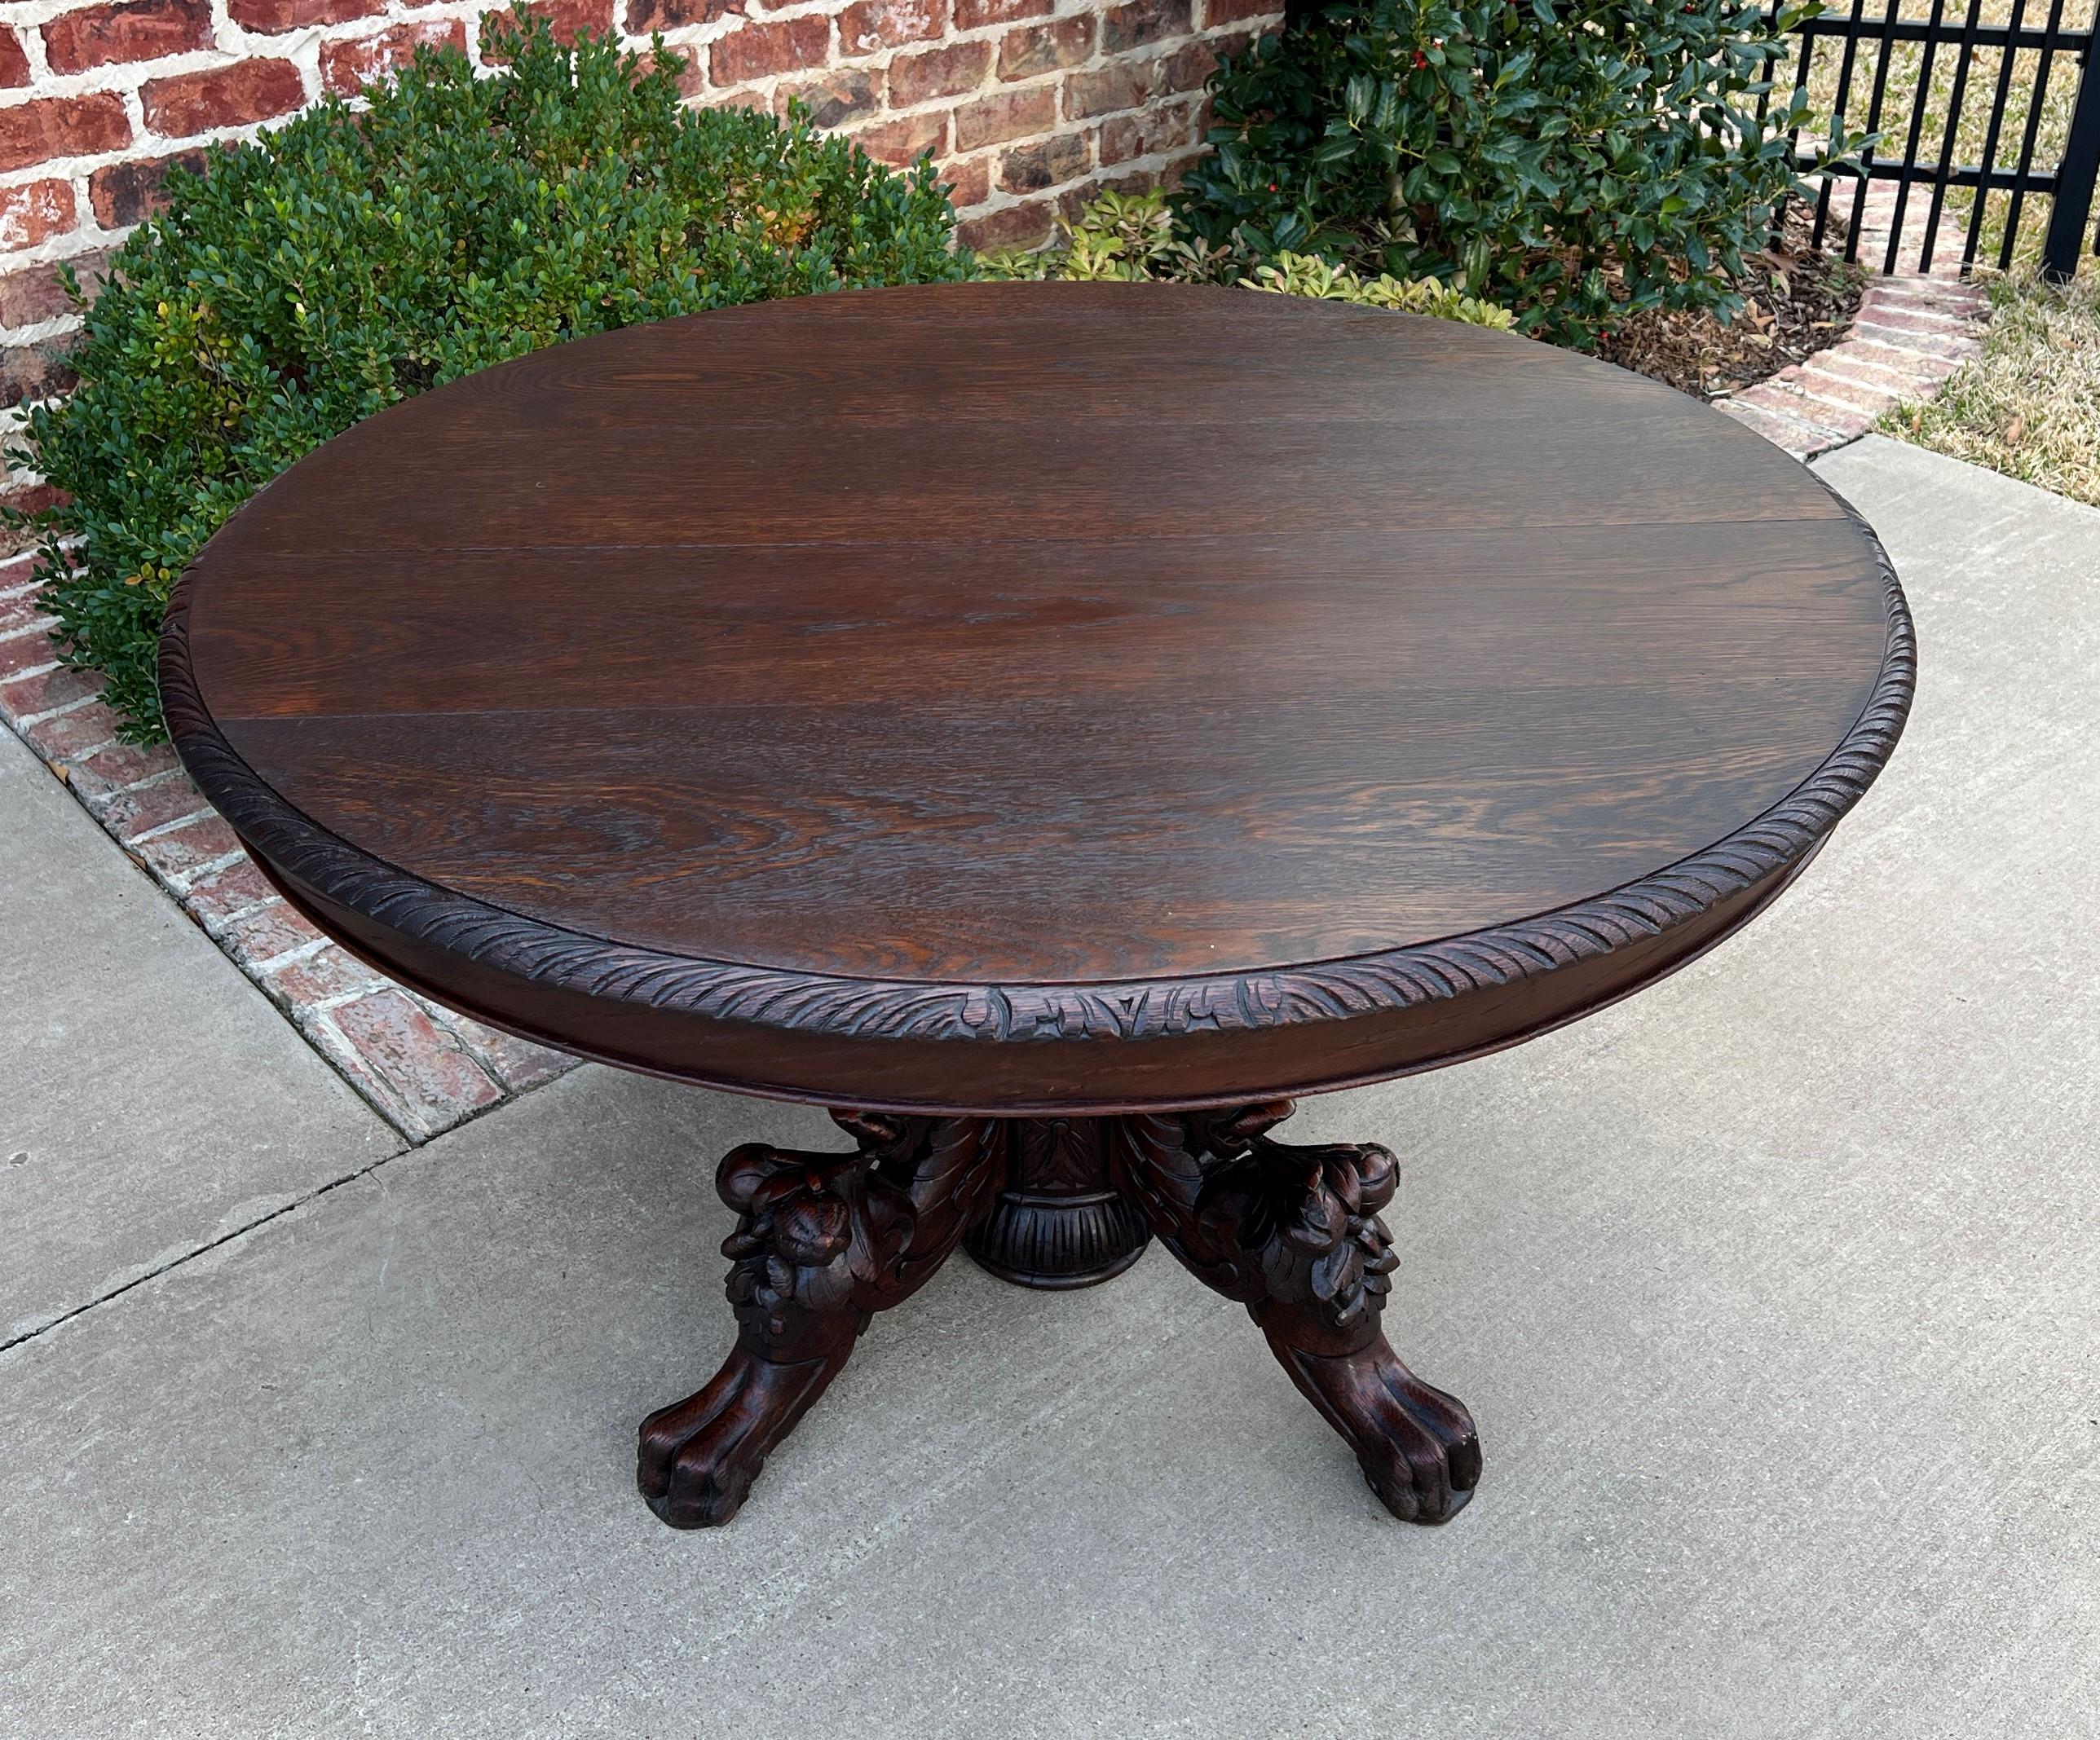 Oak Antique French OVAL Coffee Table Pedestal BLACK FOREST Hunt Table Griffons 19thC